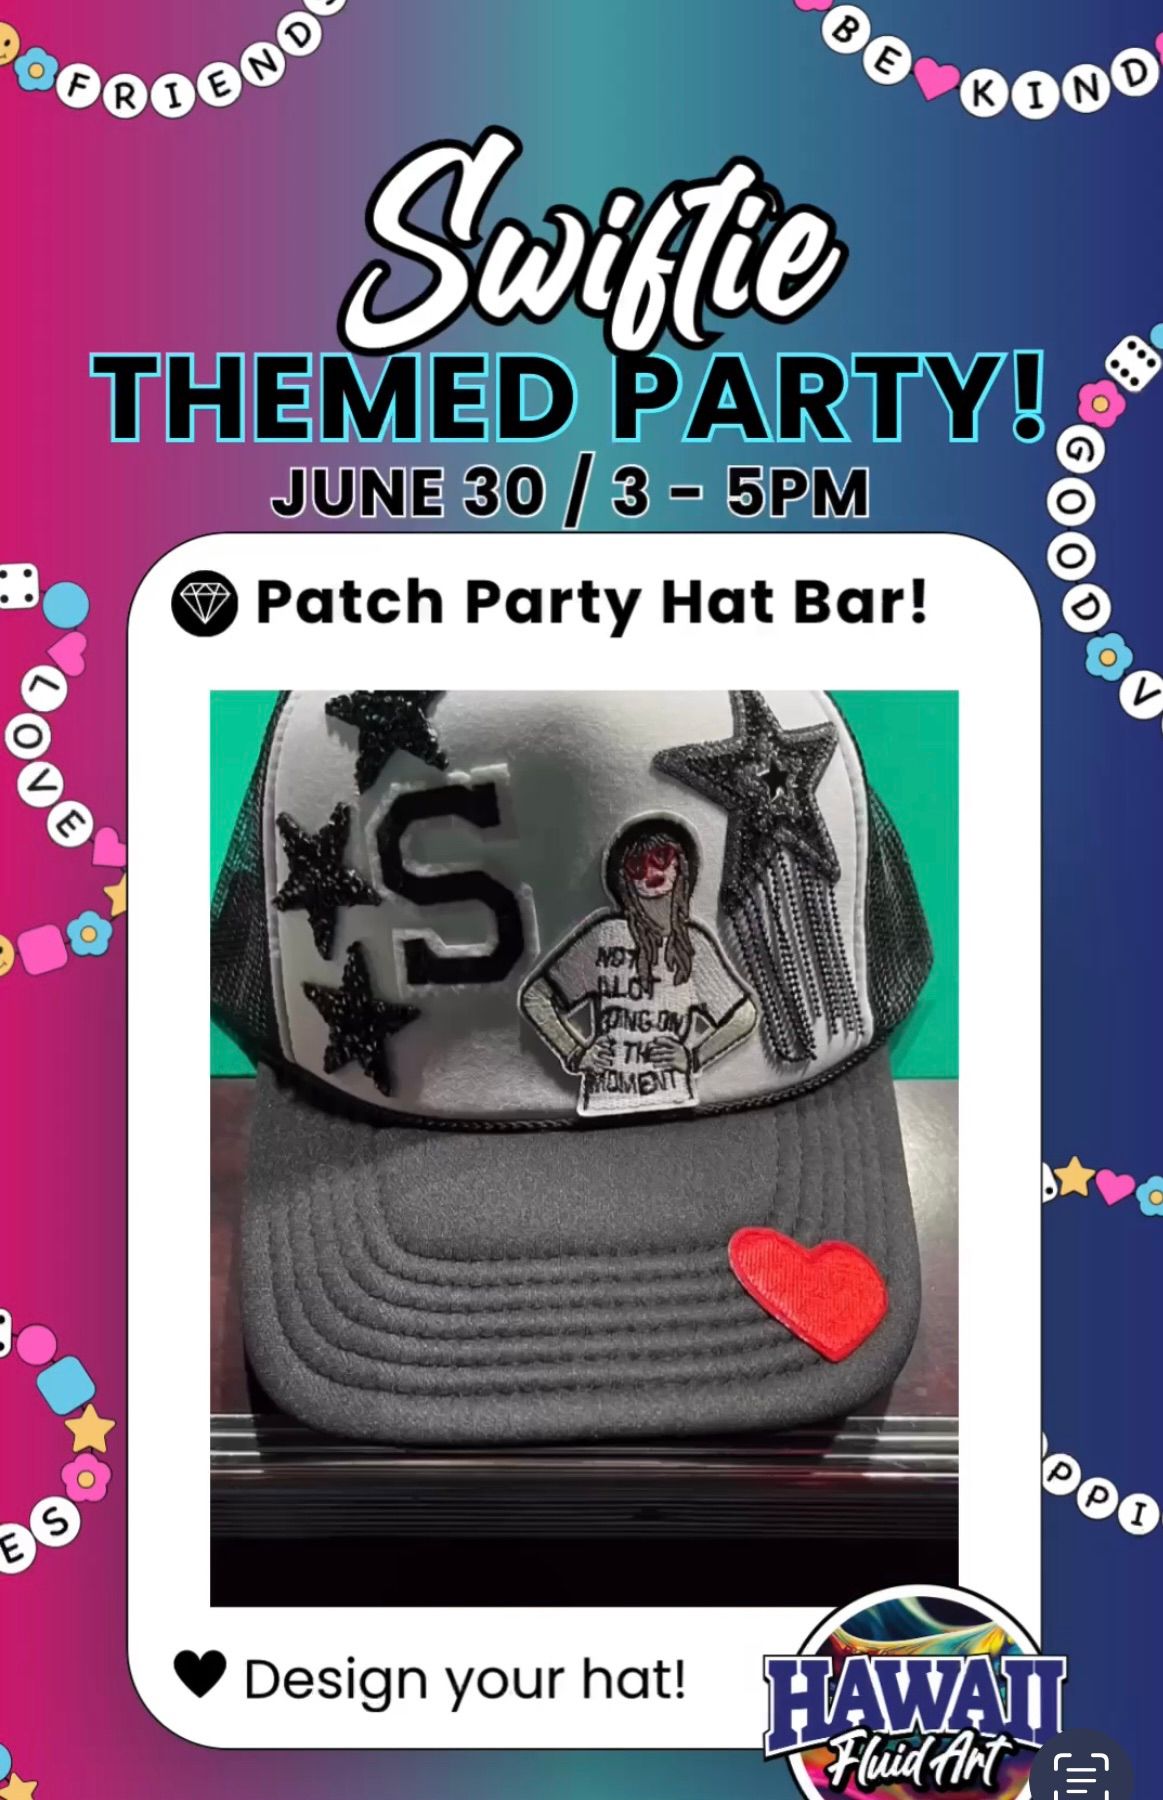 Swiftie Party! Patch hat bar, inspired painting and more!